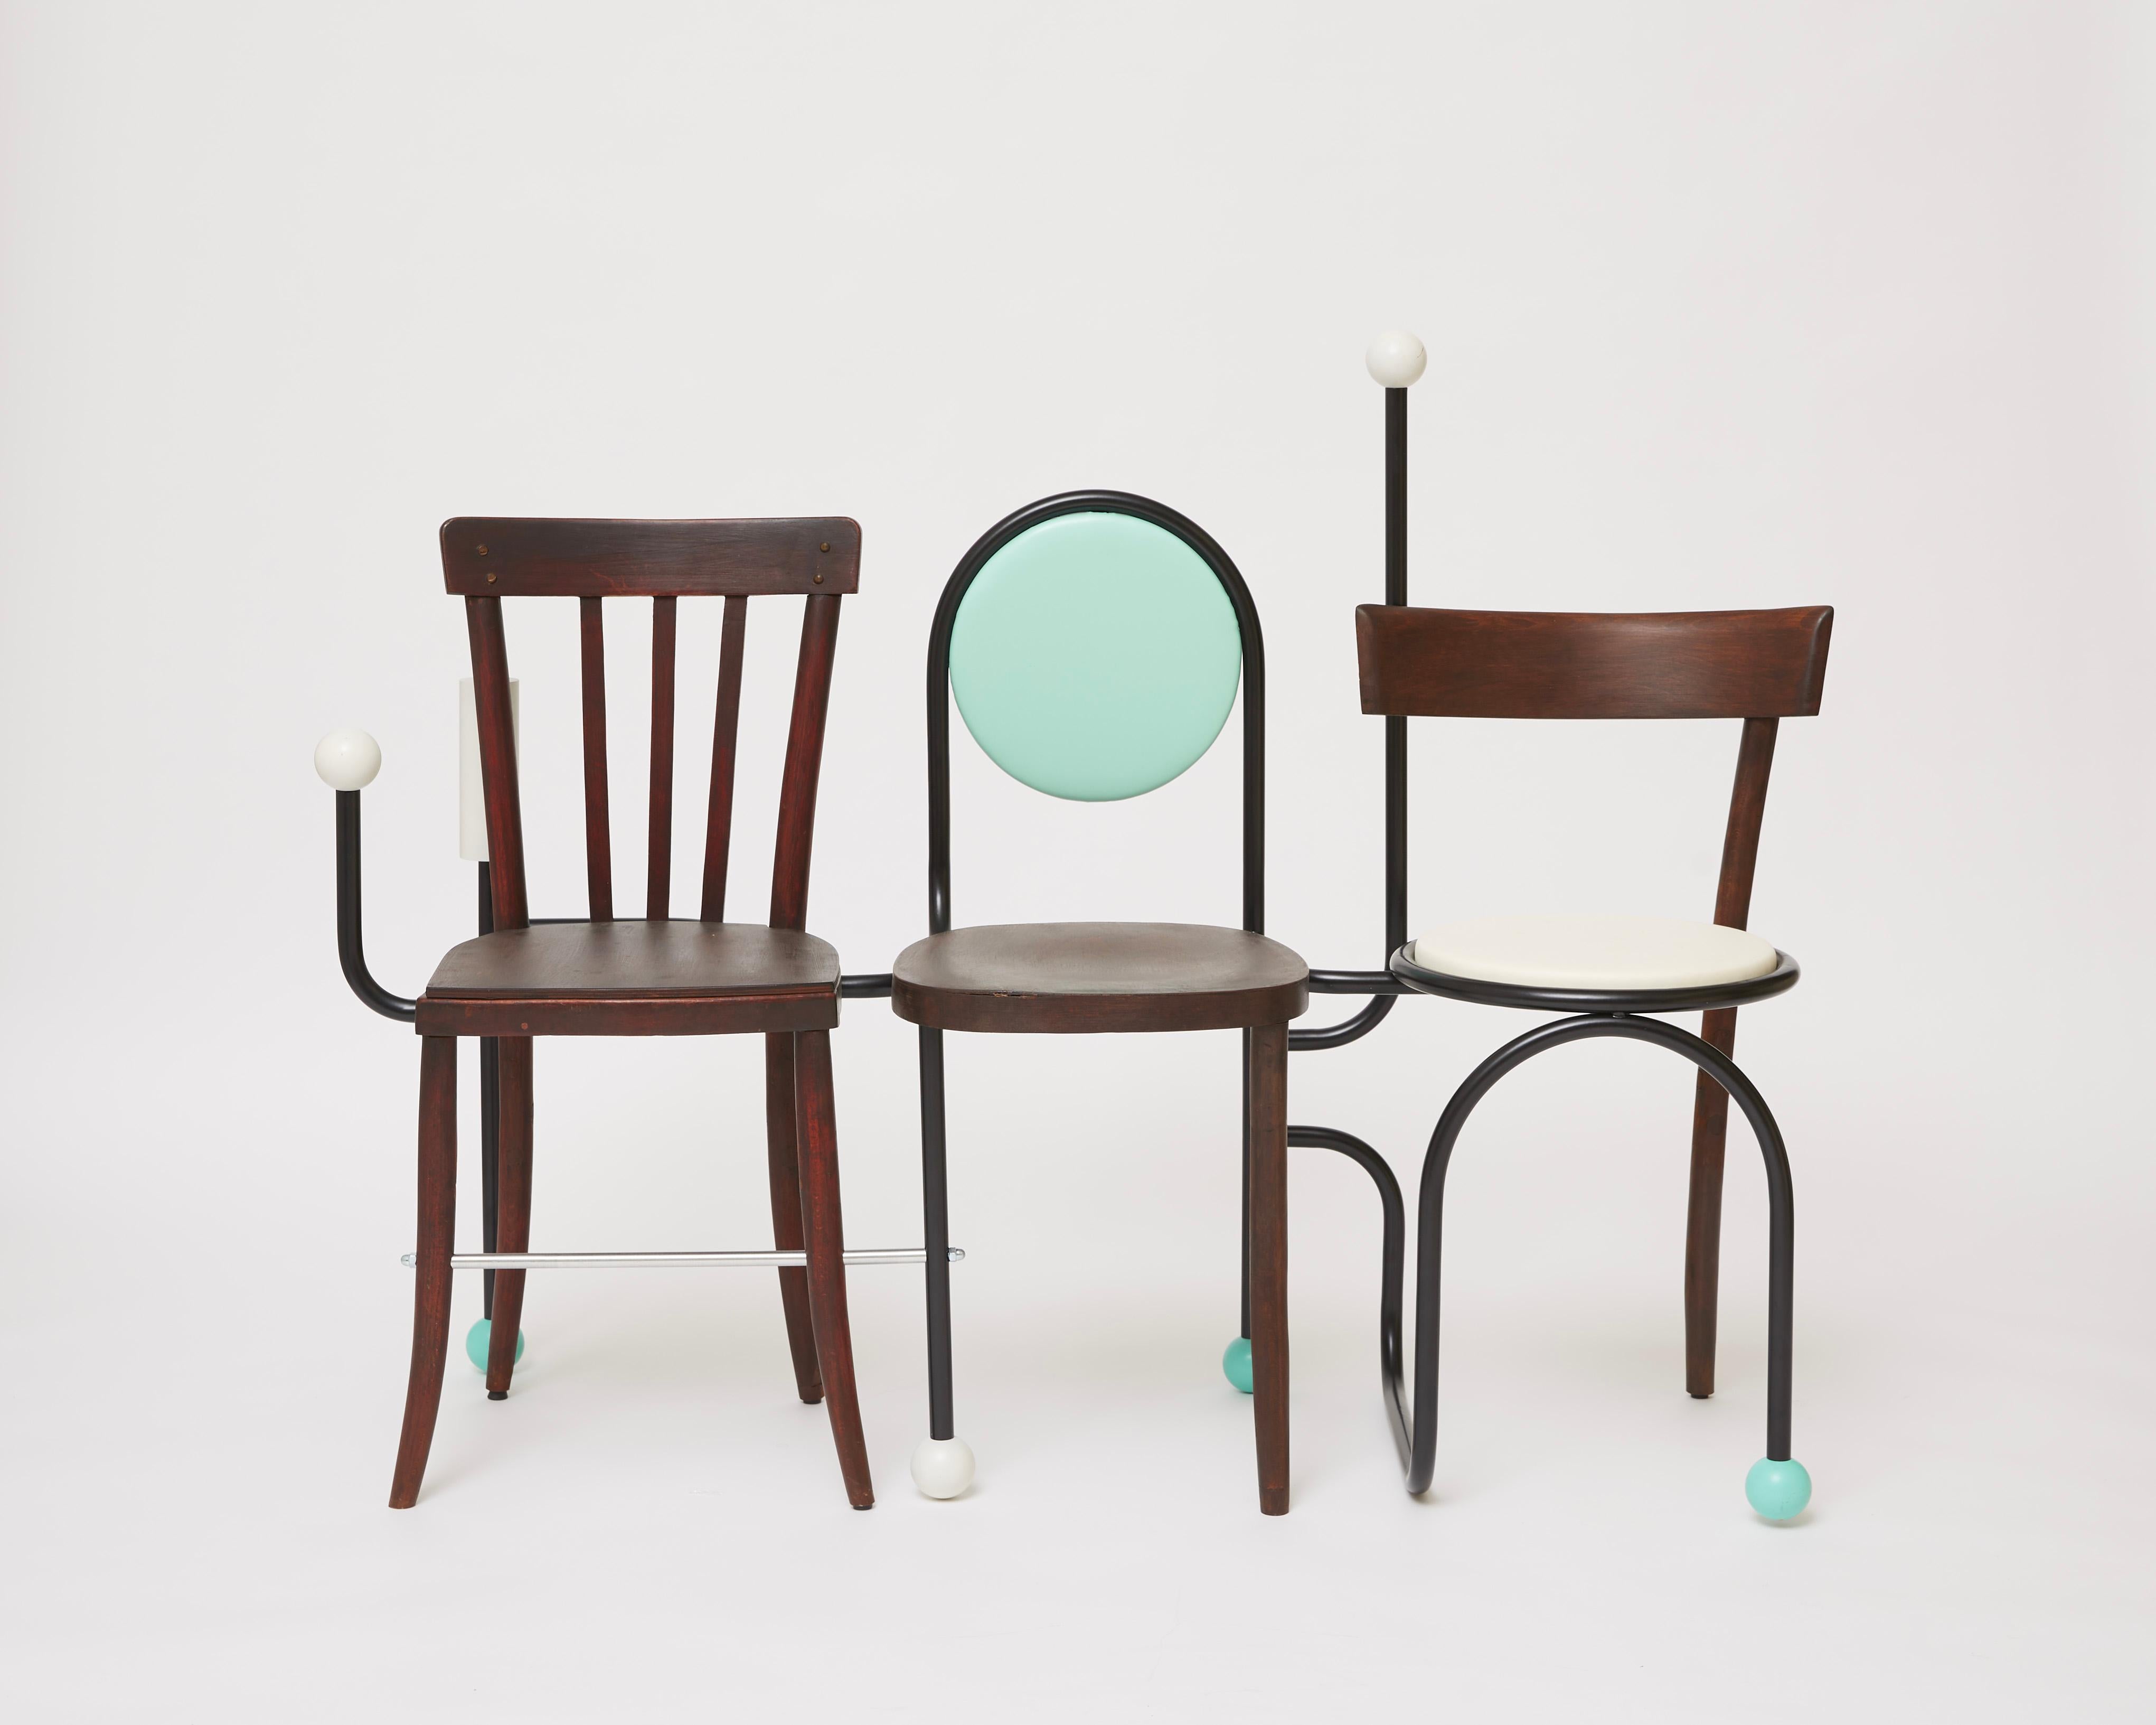 Quiet elements from 19th-century chairs coupled with an intricate cylindrical steel frame trace the silhouette of this bench of distinct eclectic inspiration. Ivory and teal inserts accent the design, actualizing the dashes and dots typical of the